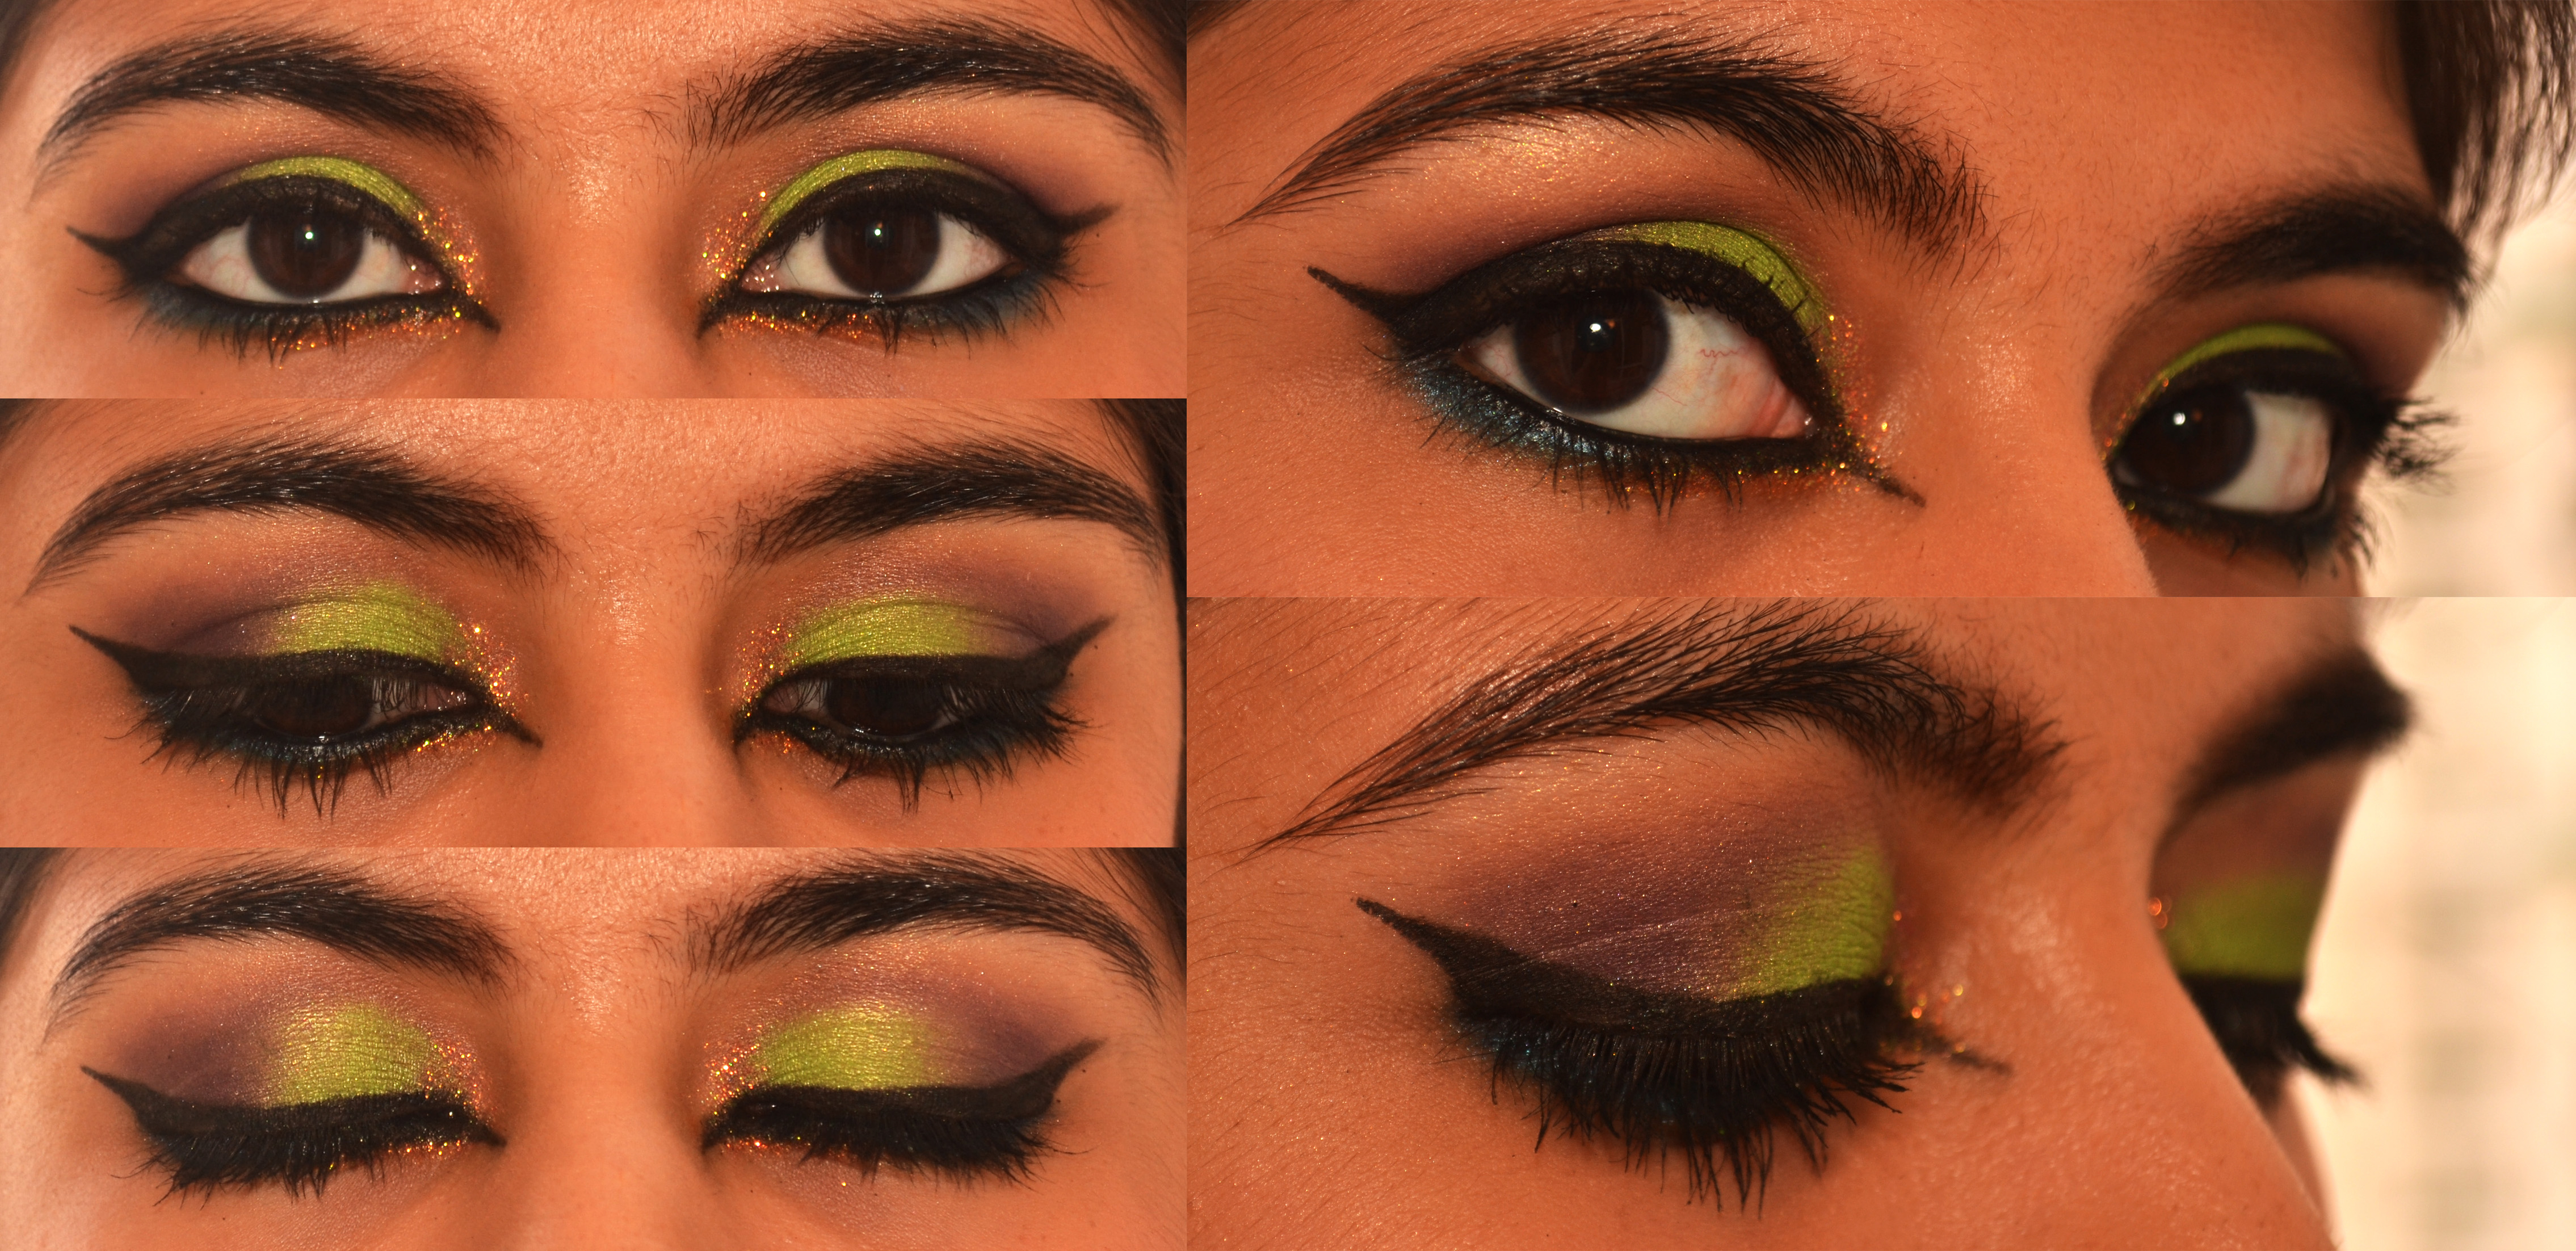 How To Apply Eye Makeup With Pictures How To Do Eye Makeup Step Step Indian Makeup And Beauty Blog